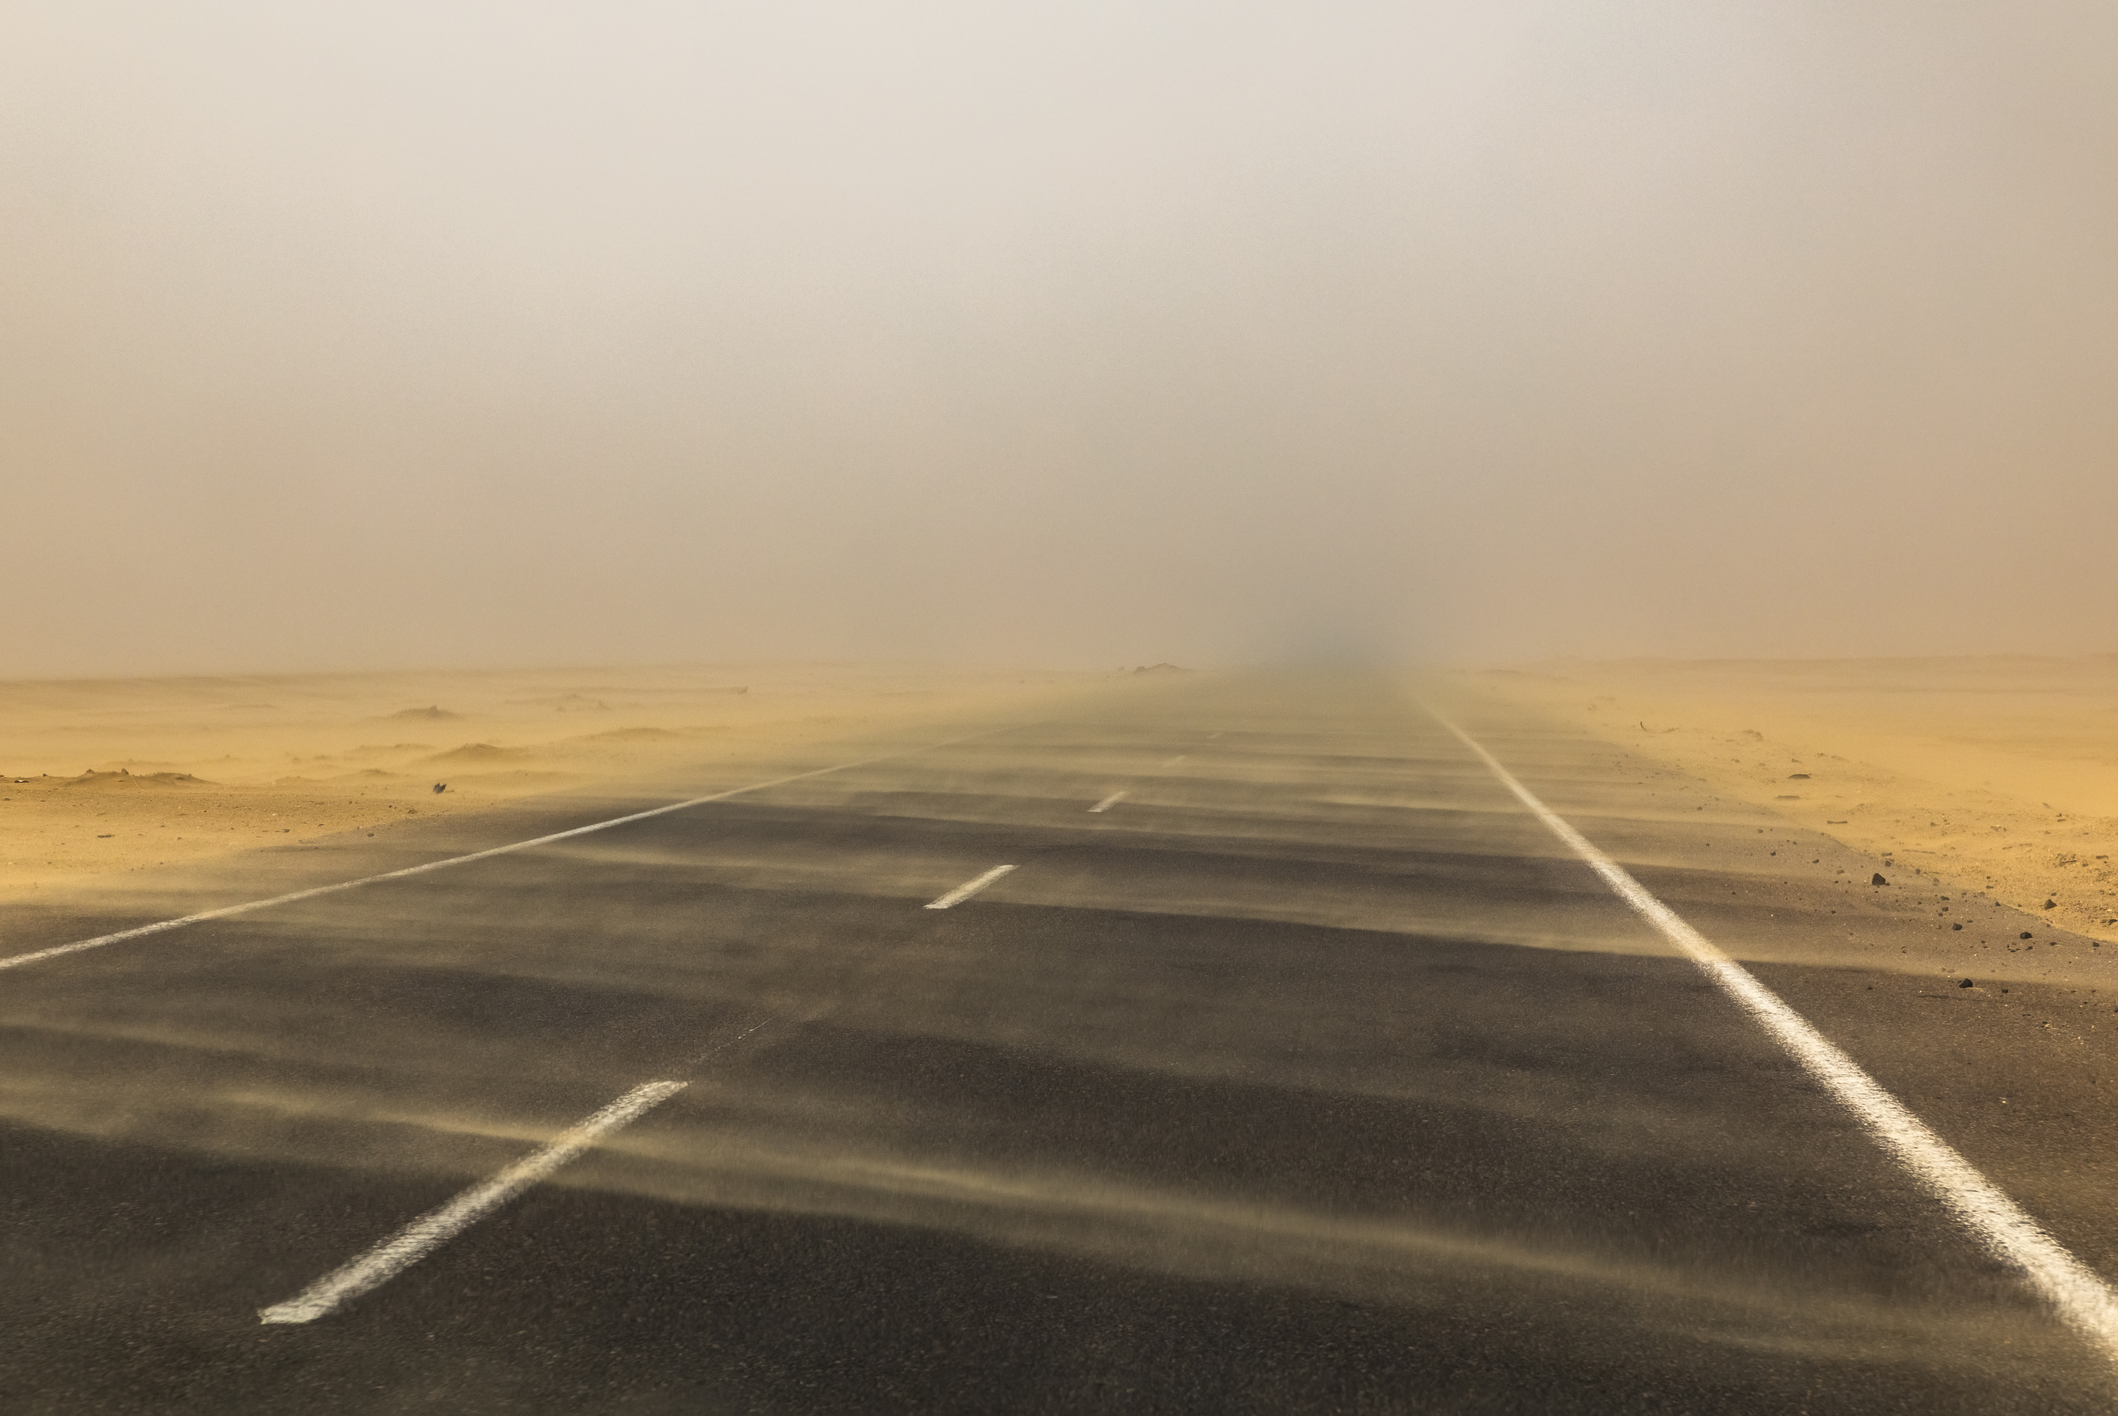 Sand storm over the road in the deser